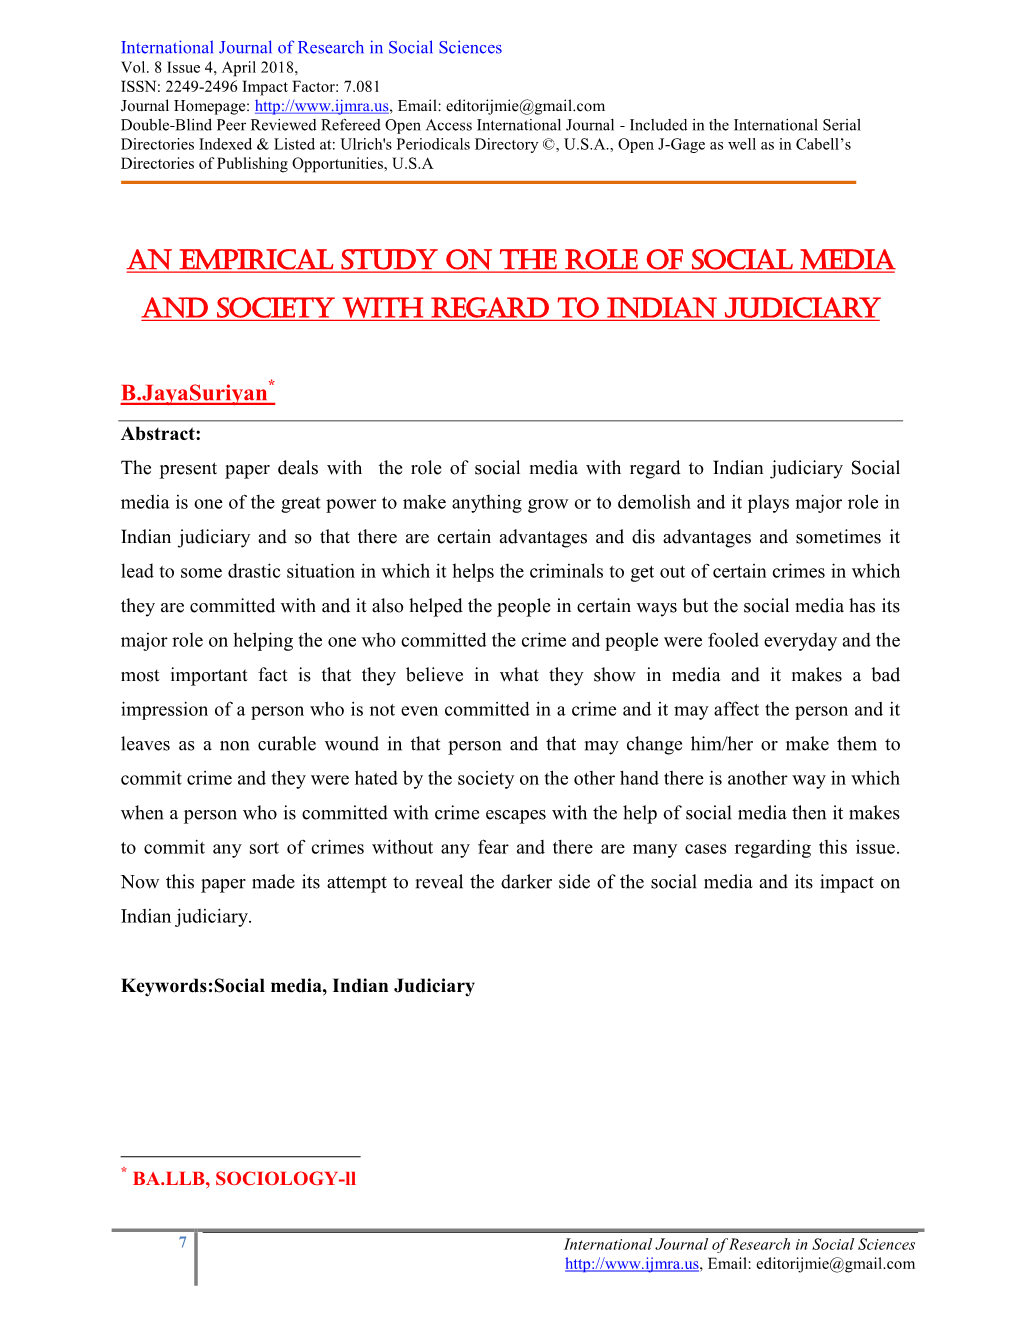 An Empirical Study on the Role of Social Media and Society with Regard to Indian Judiciary